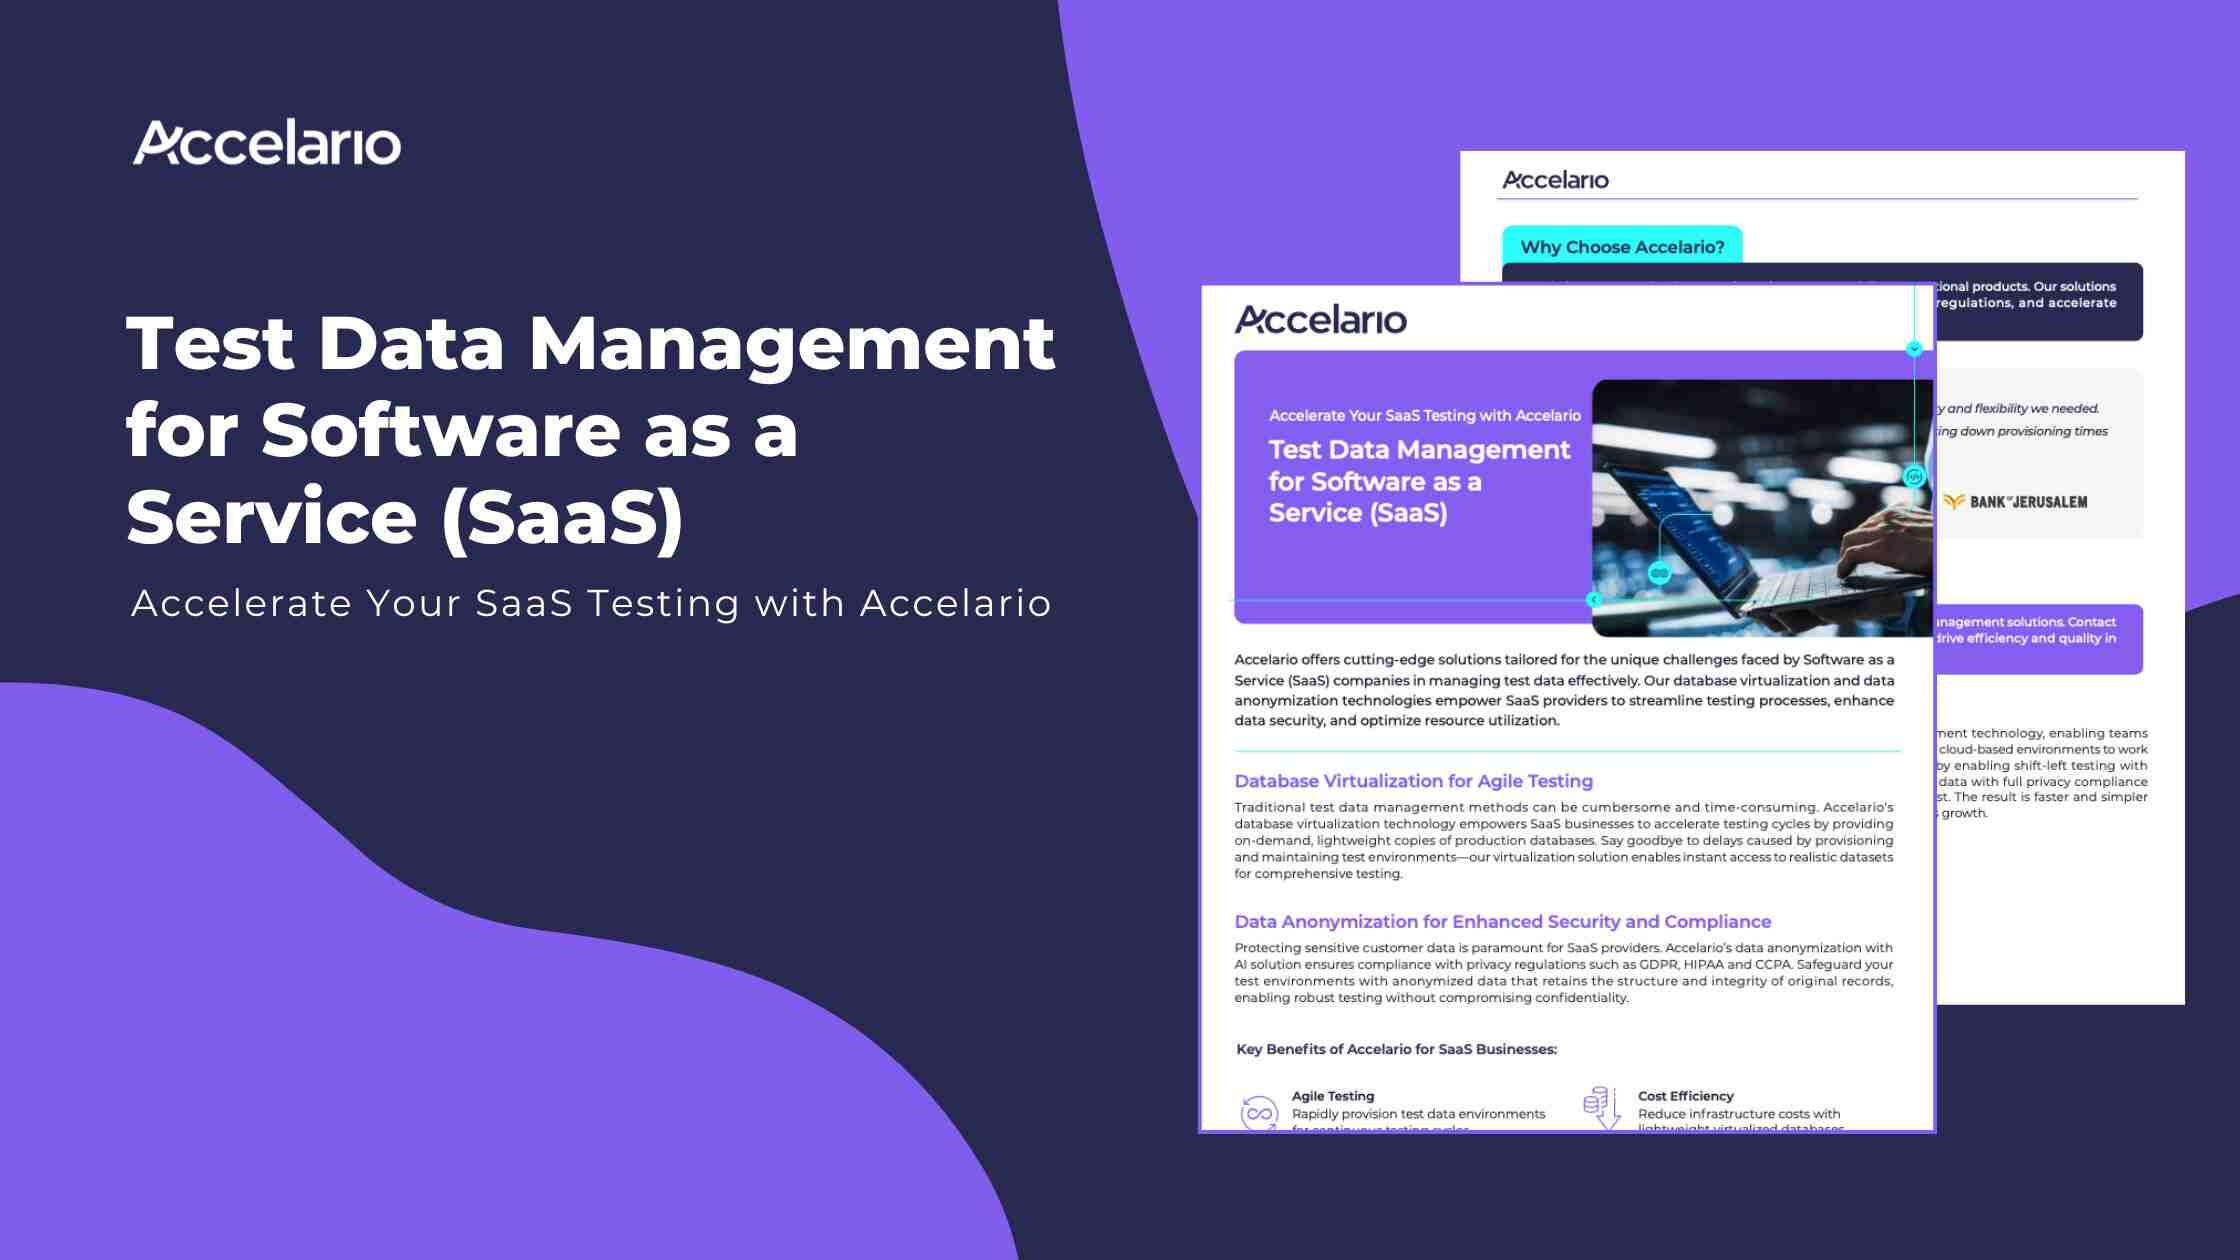 Test Data Management for Software as a Service (SaaS)